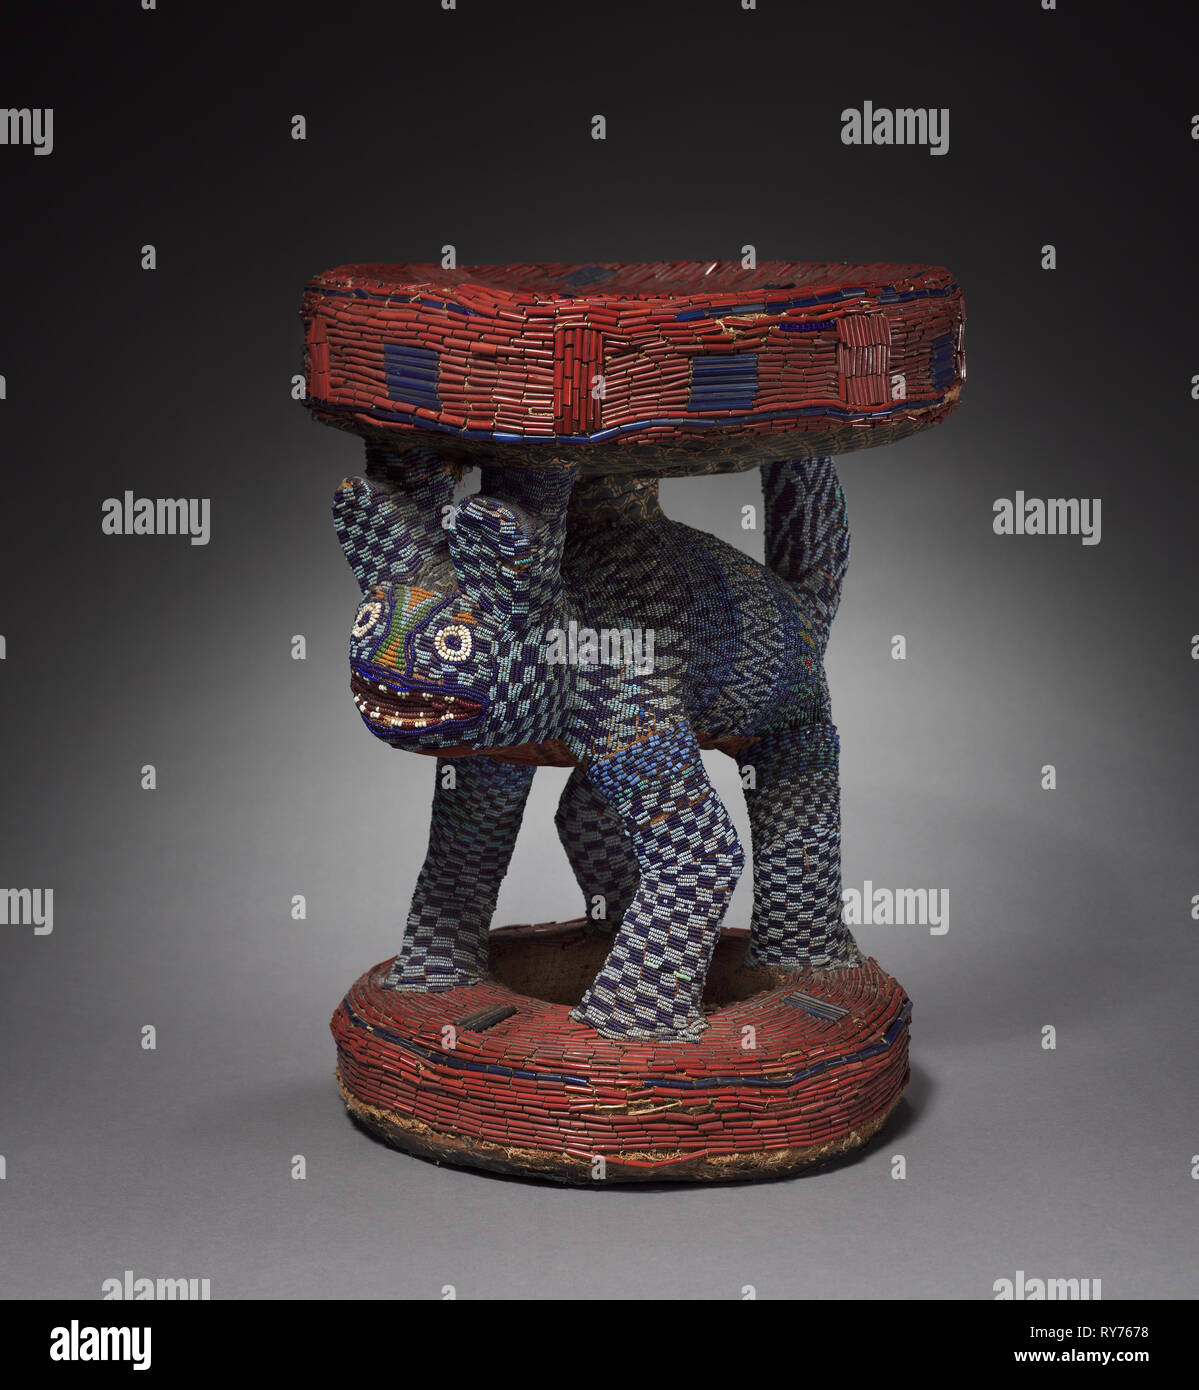 Leopard Caryatid Stool, possibly 1800s. Equatorial Africa, Cameroon,  Bandjoun kingdom, Bamileke, possibly 19th century. Wood, cotton, fabric and  glass beads; overall: 51 x 38 x 43 cm (20 1/16 x 14 15/16 x 16 15/16 in  Stock Photo - Alamy